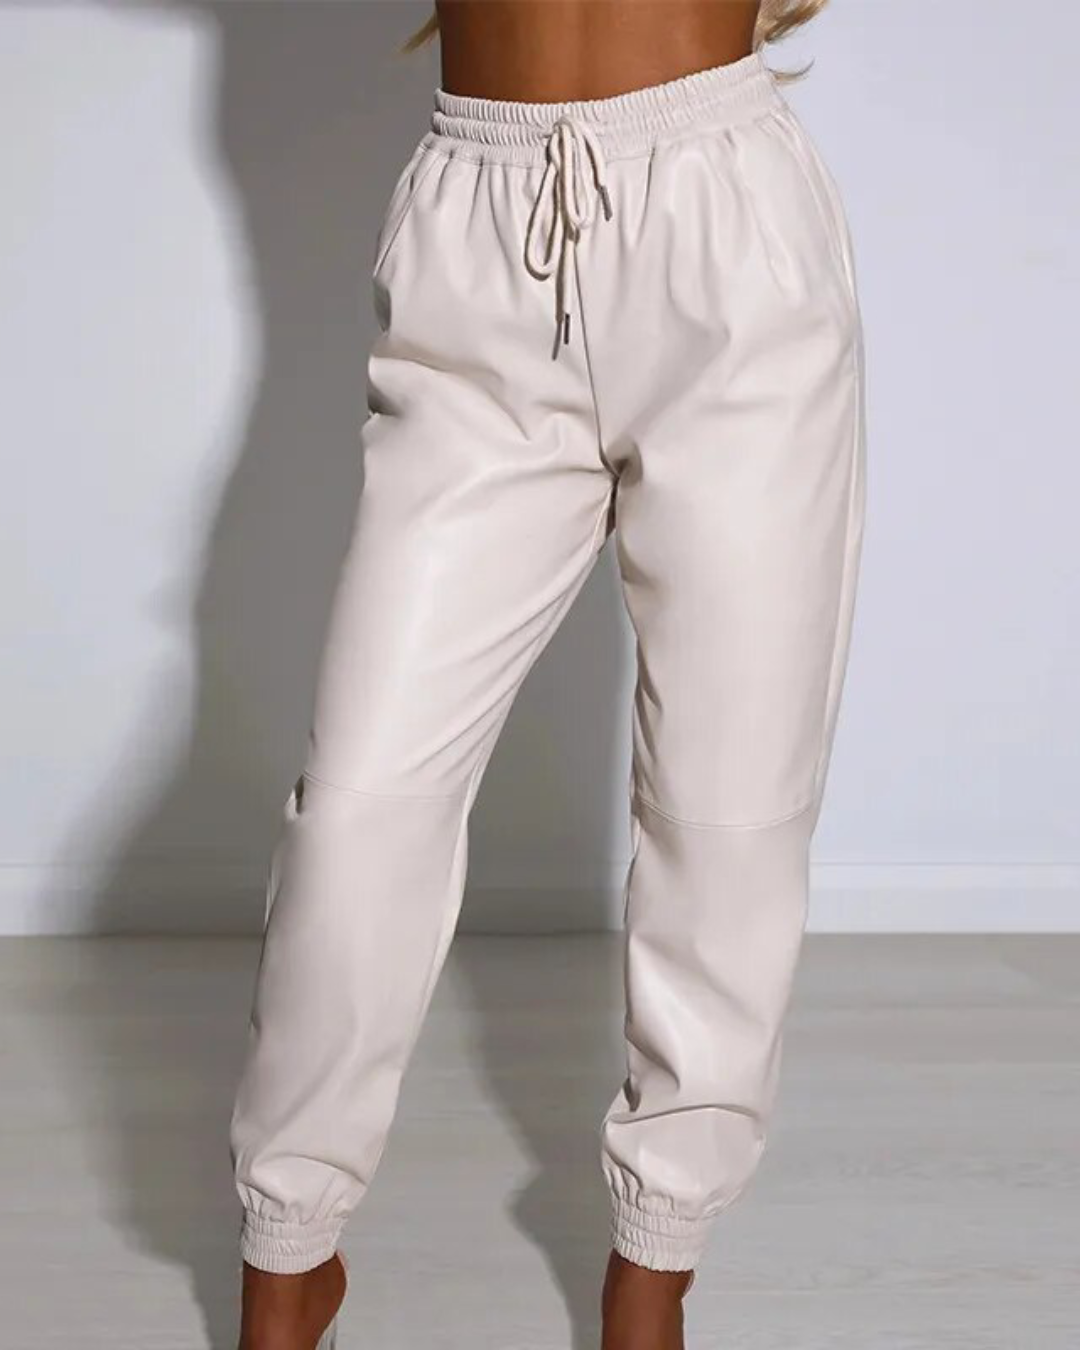 High Waist Loose Leather Pants White S 